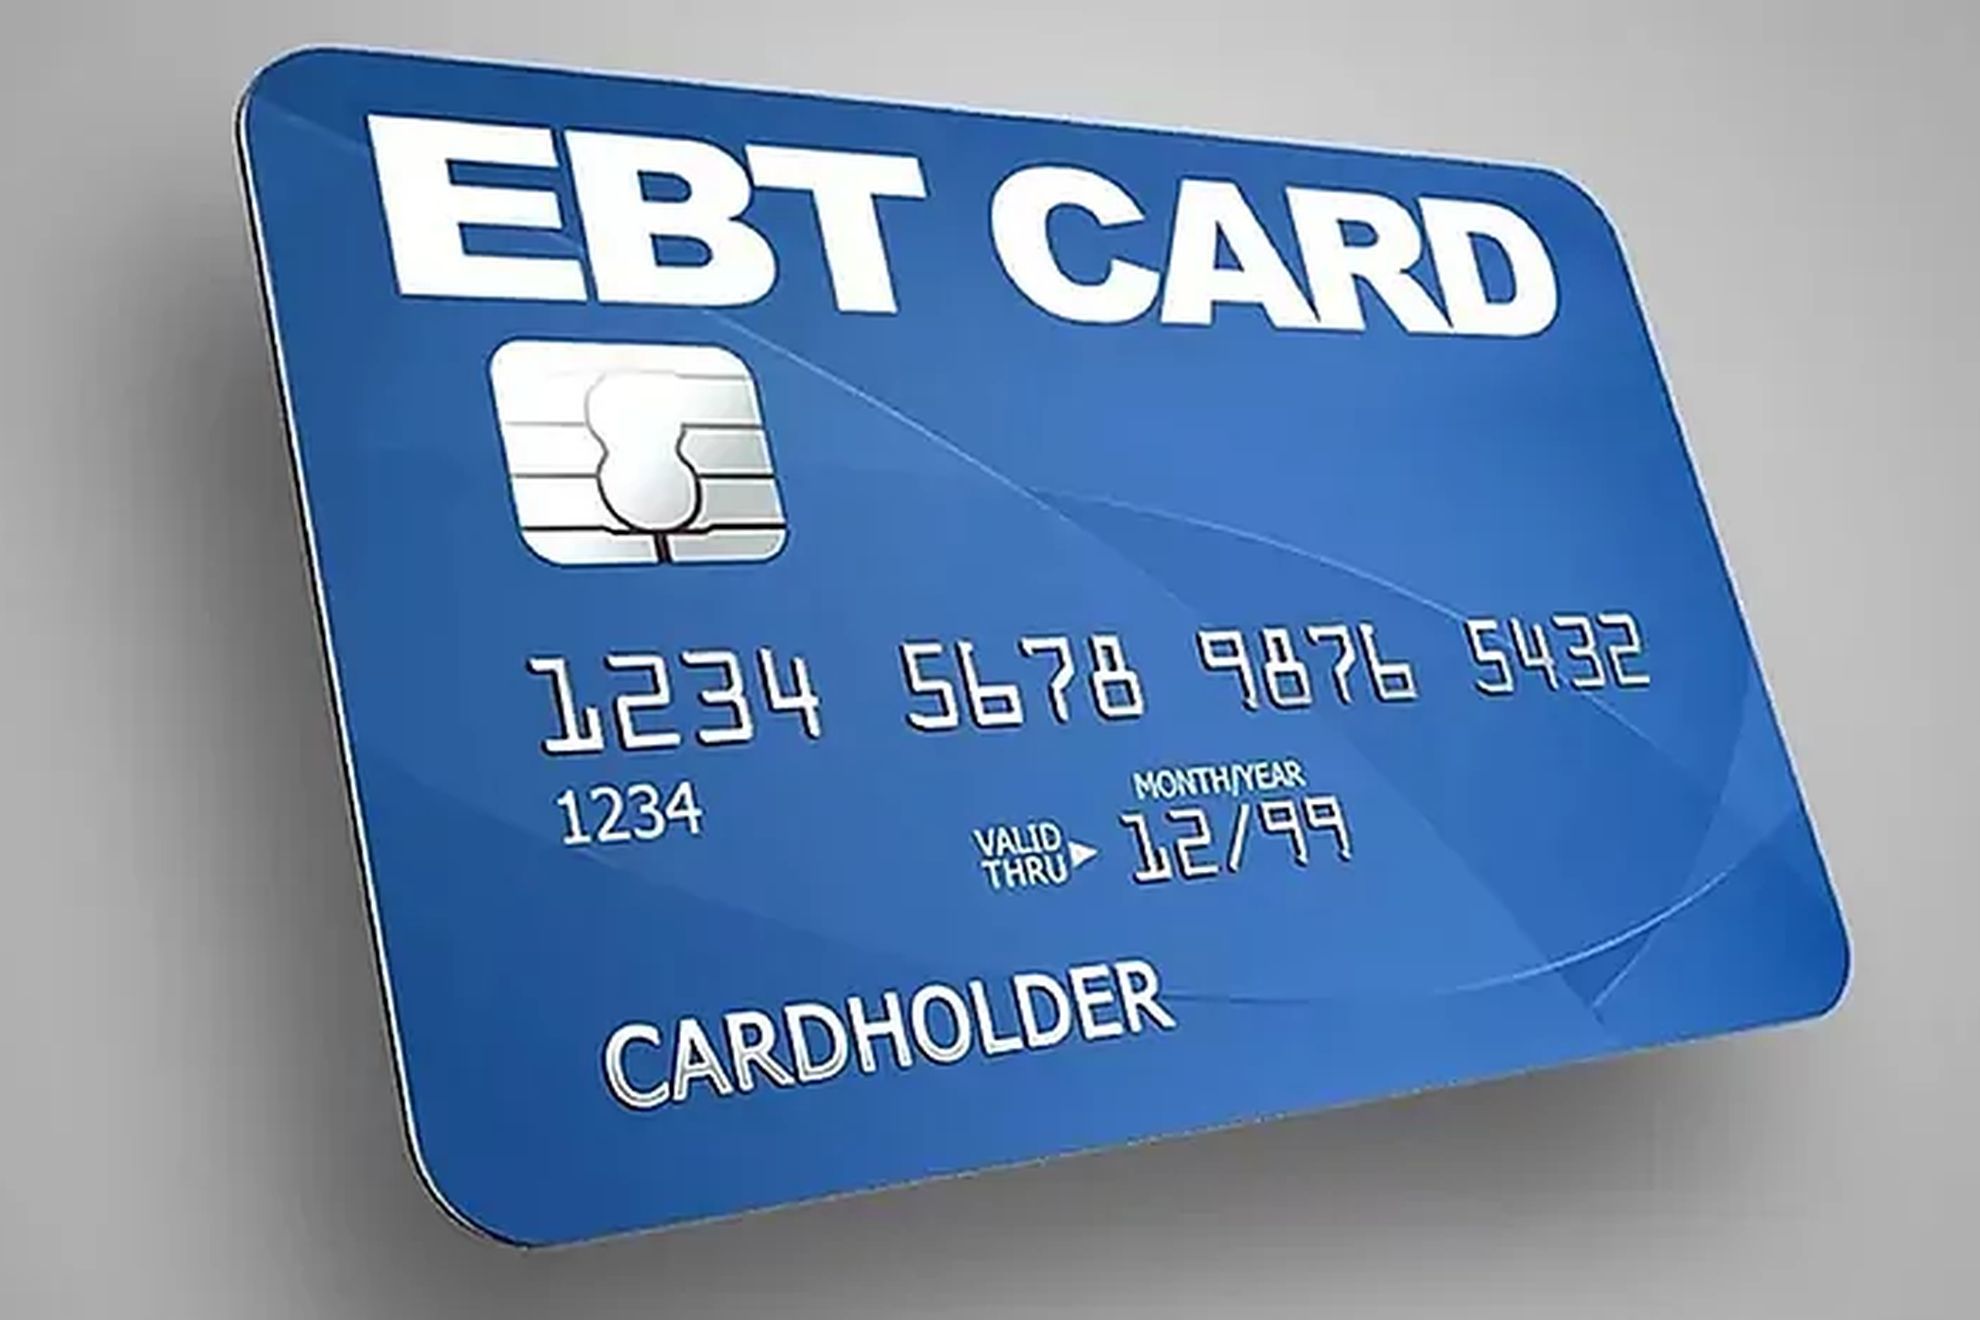 P-EBT 3.0: When will the P-EBT card be reloaded for 2022-2023?